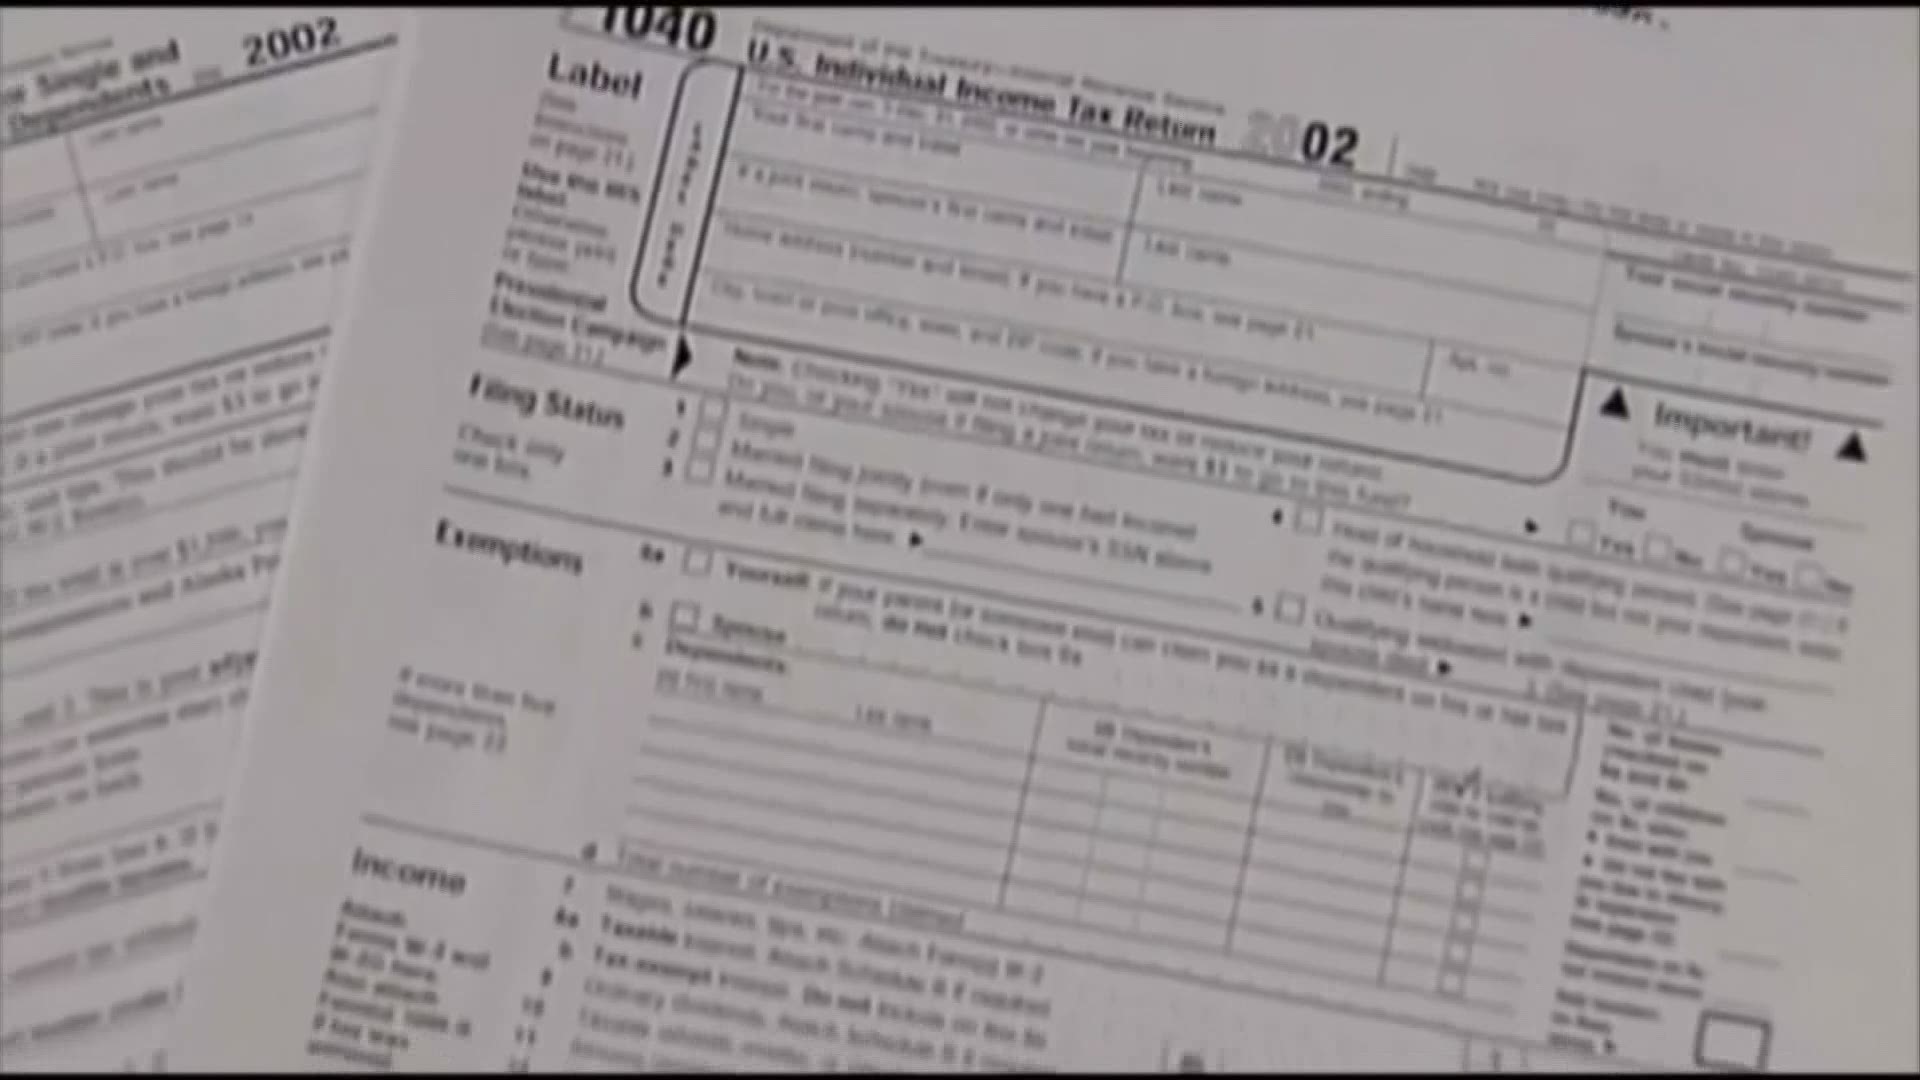 Many questions have been asked on how the stimulus checks can affect your taxes.